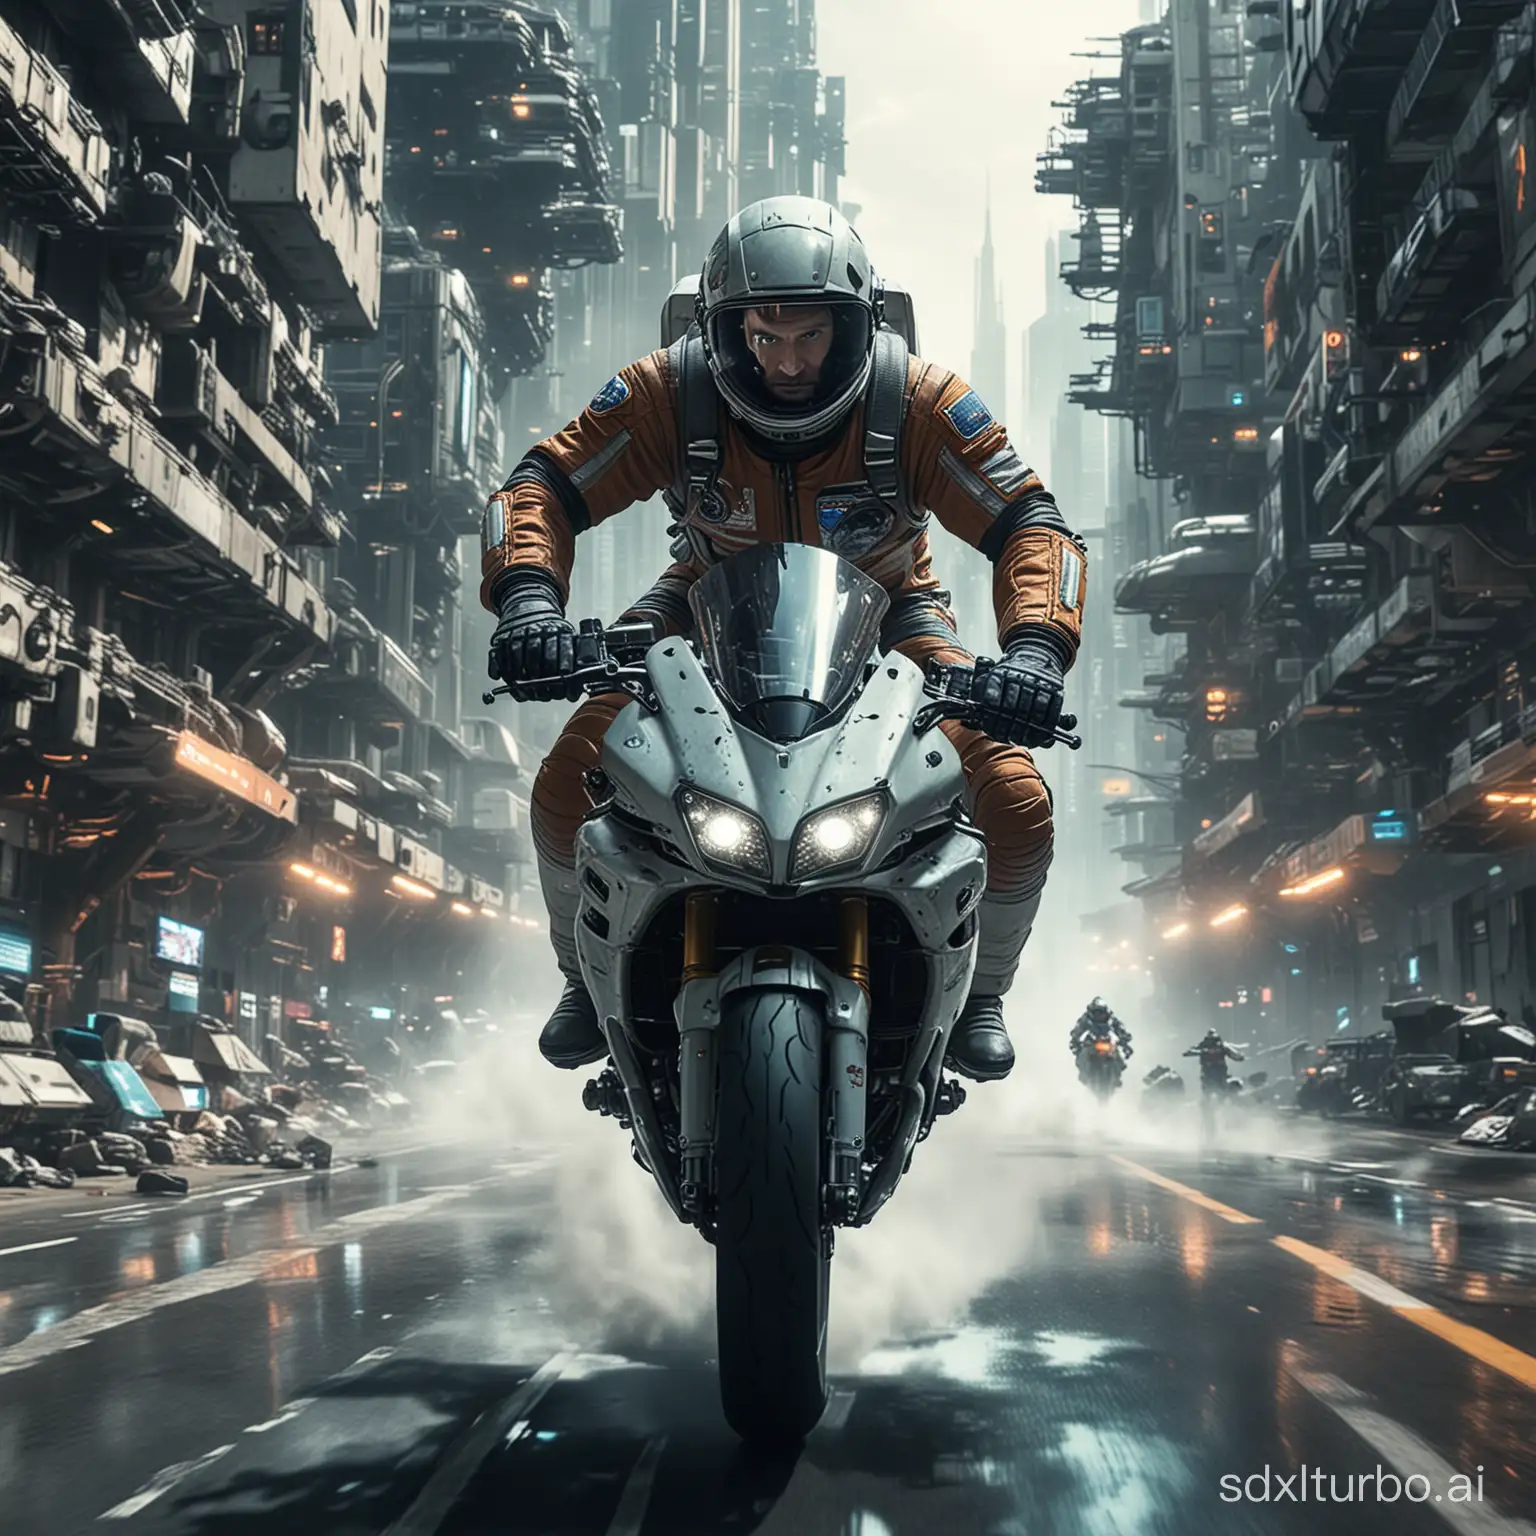 An astronaut is racing on a motorcycle through a futuristic city